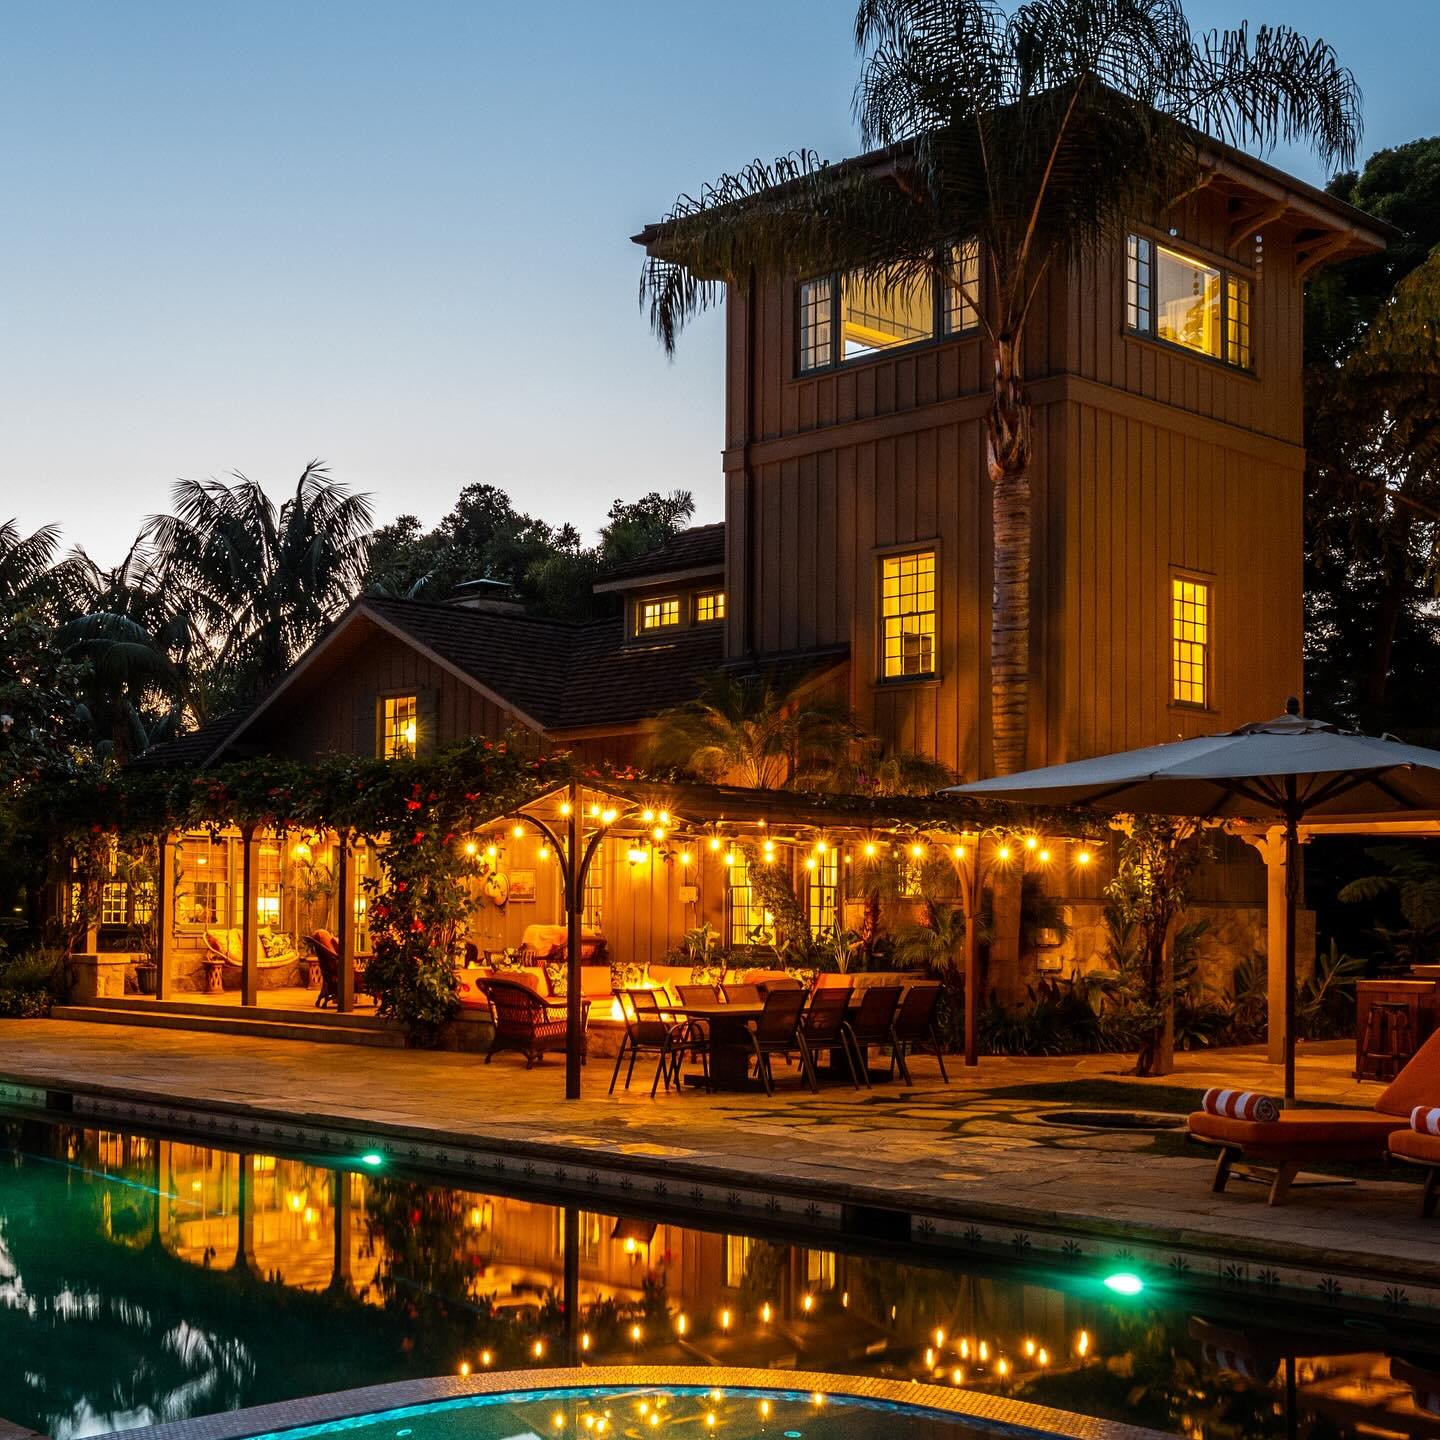 Find your happy place at Sea Ranch Montecito, a private sanctuary nestled between the Santa Ynez mountain range and the Pacific Ocean. We have limited availability left this Summer, reach out now and mention #LastDaysOfSummer for discounted rates. 

